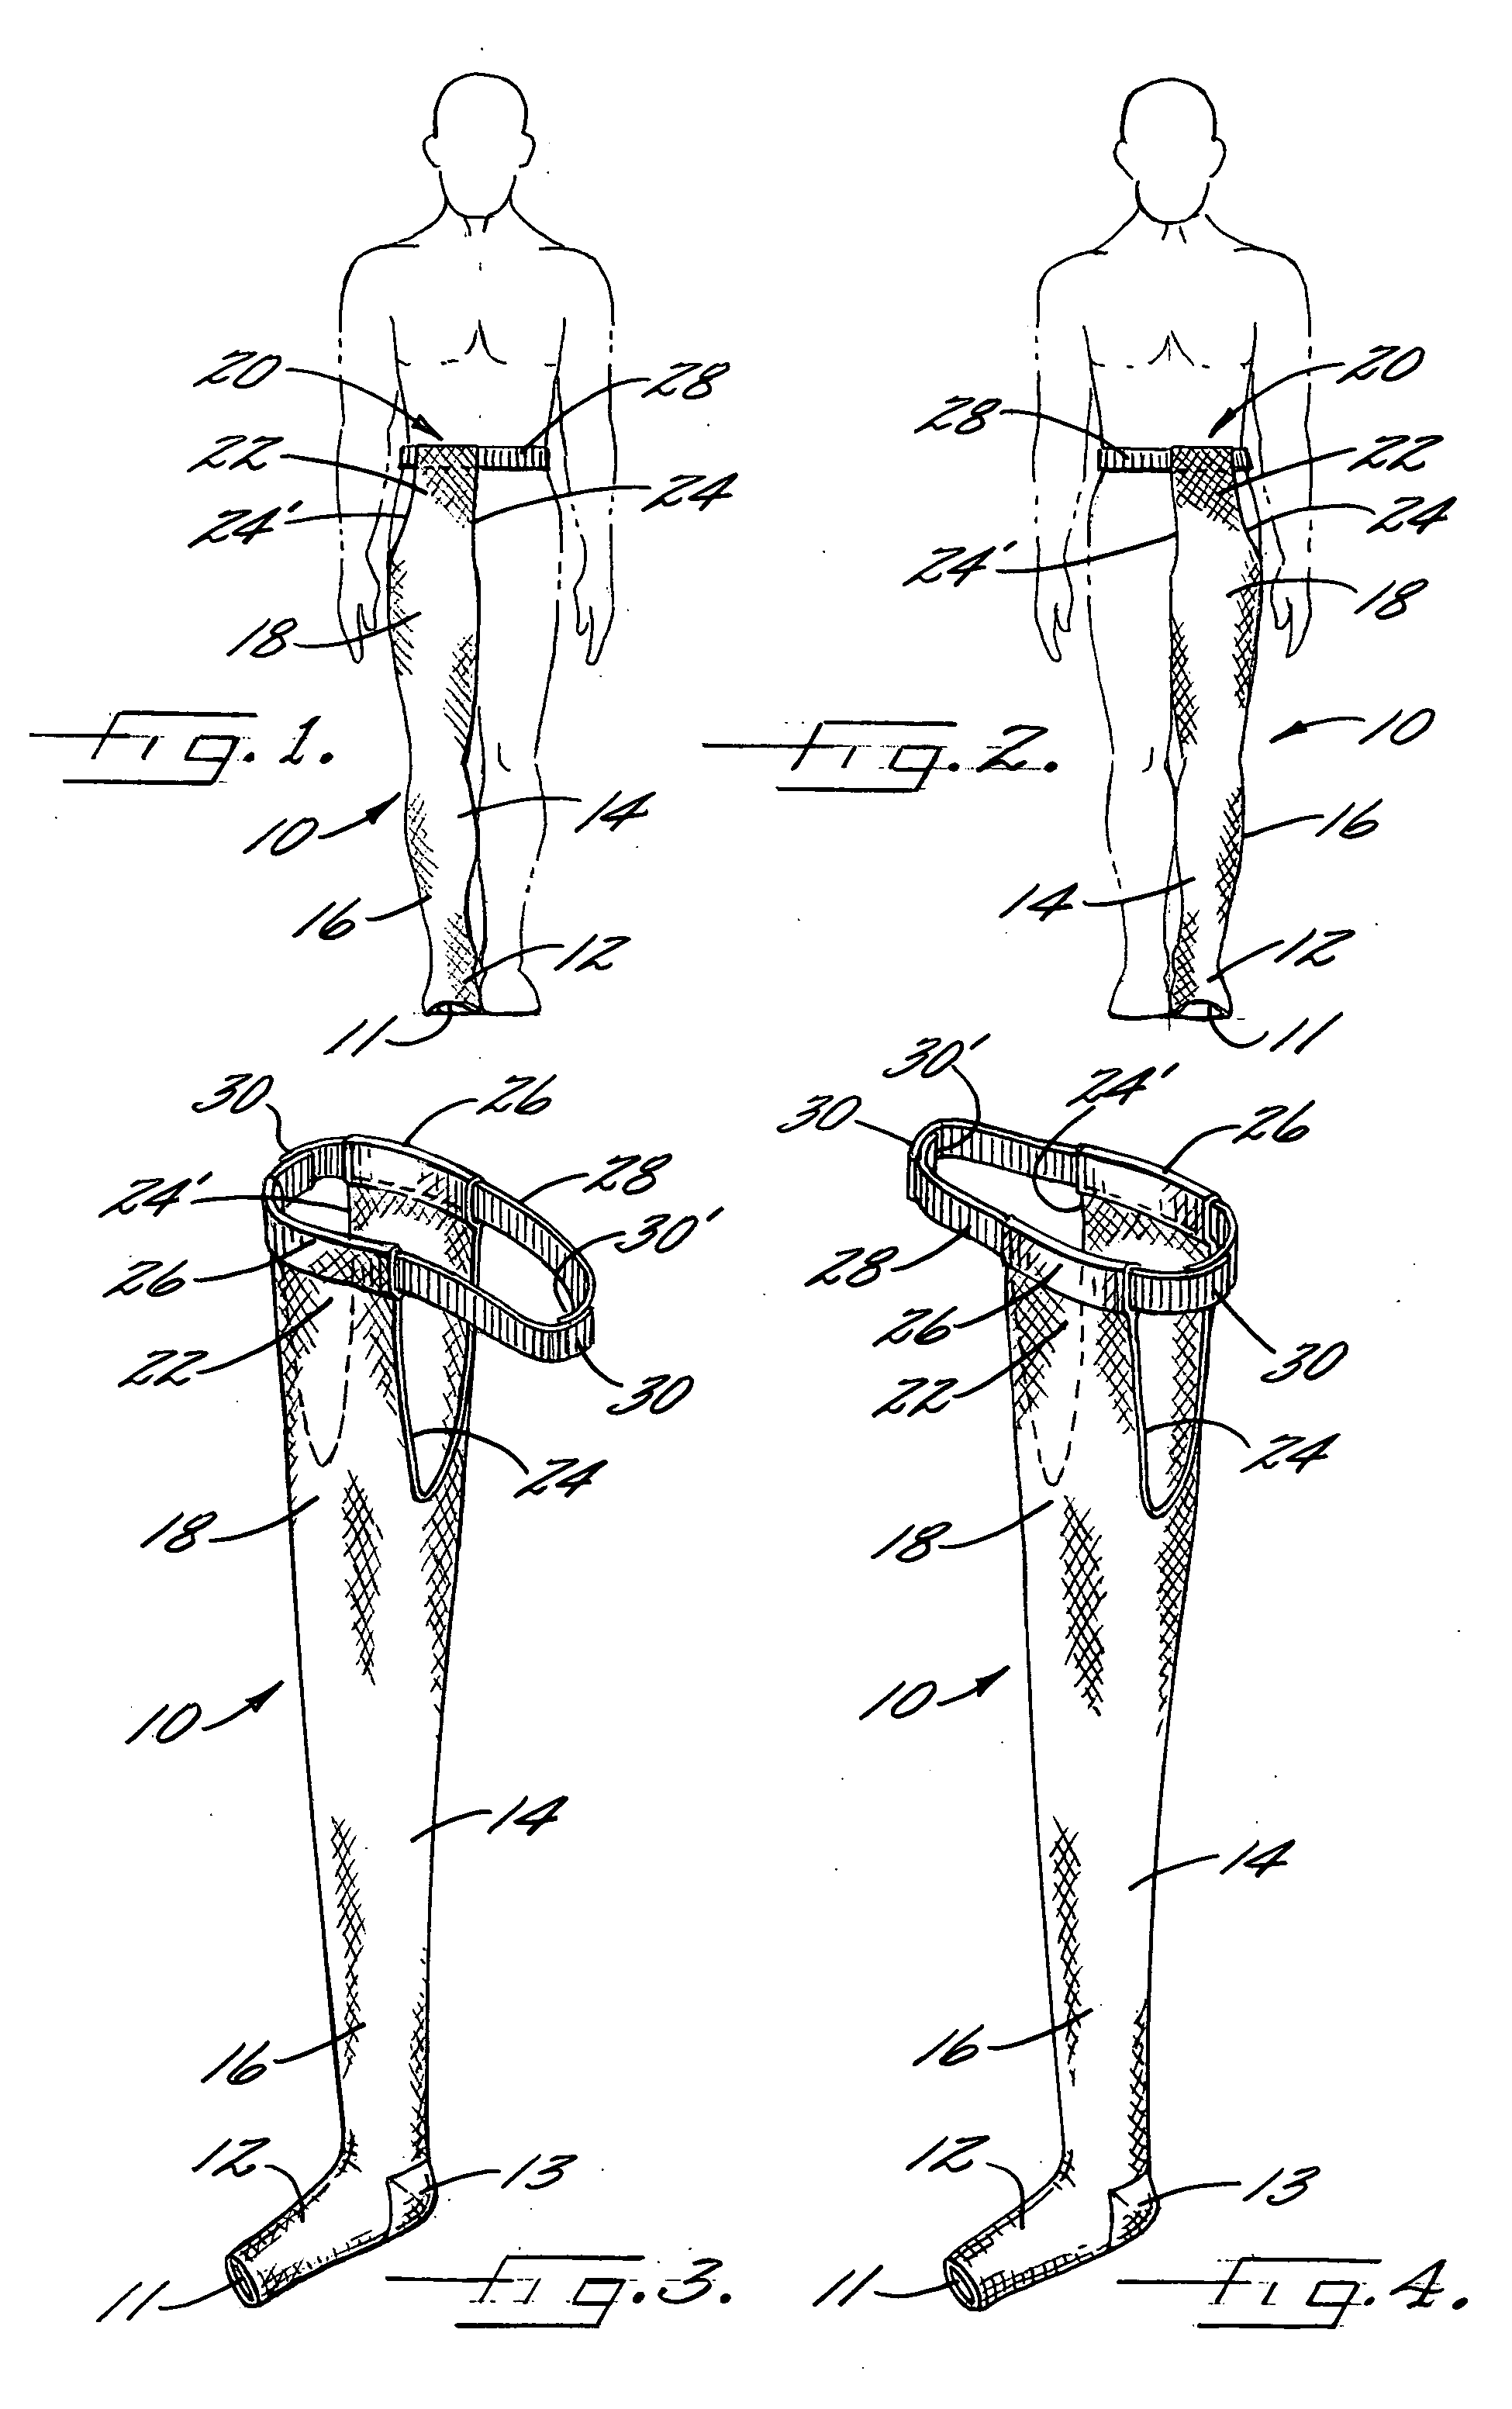 Universal chap-style compression stocking